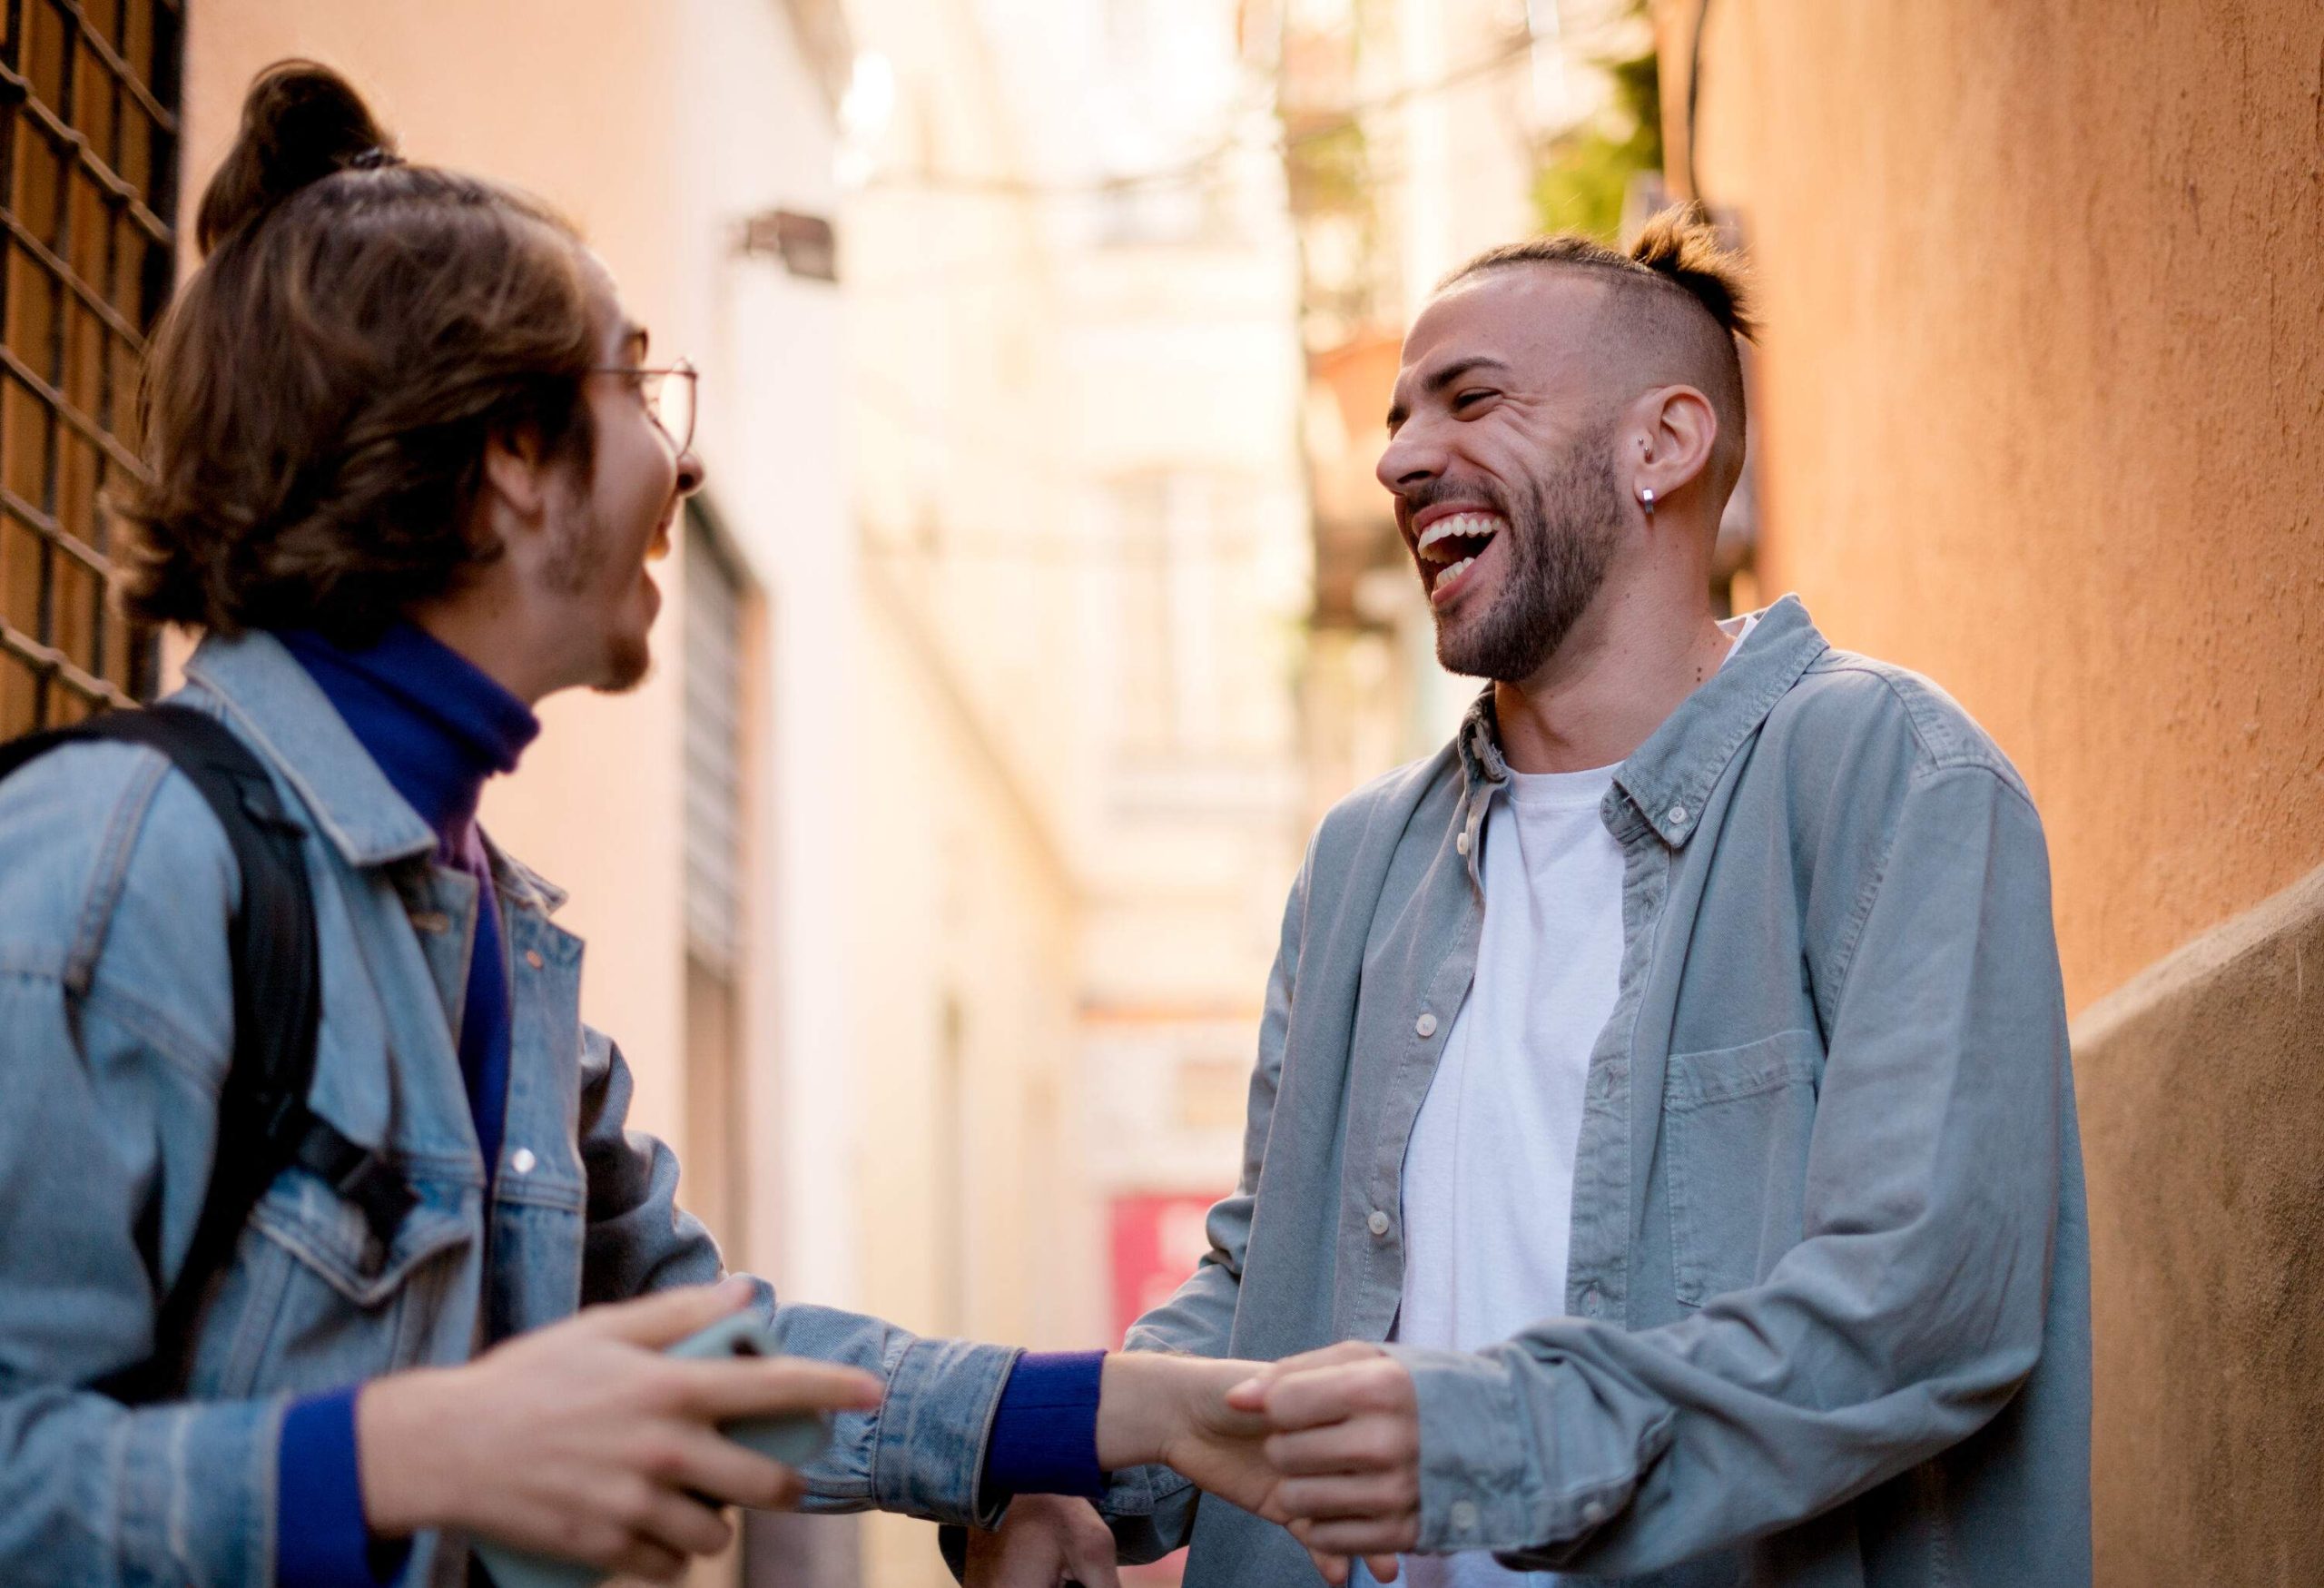 Two casually dressed men are laughing at each other.